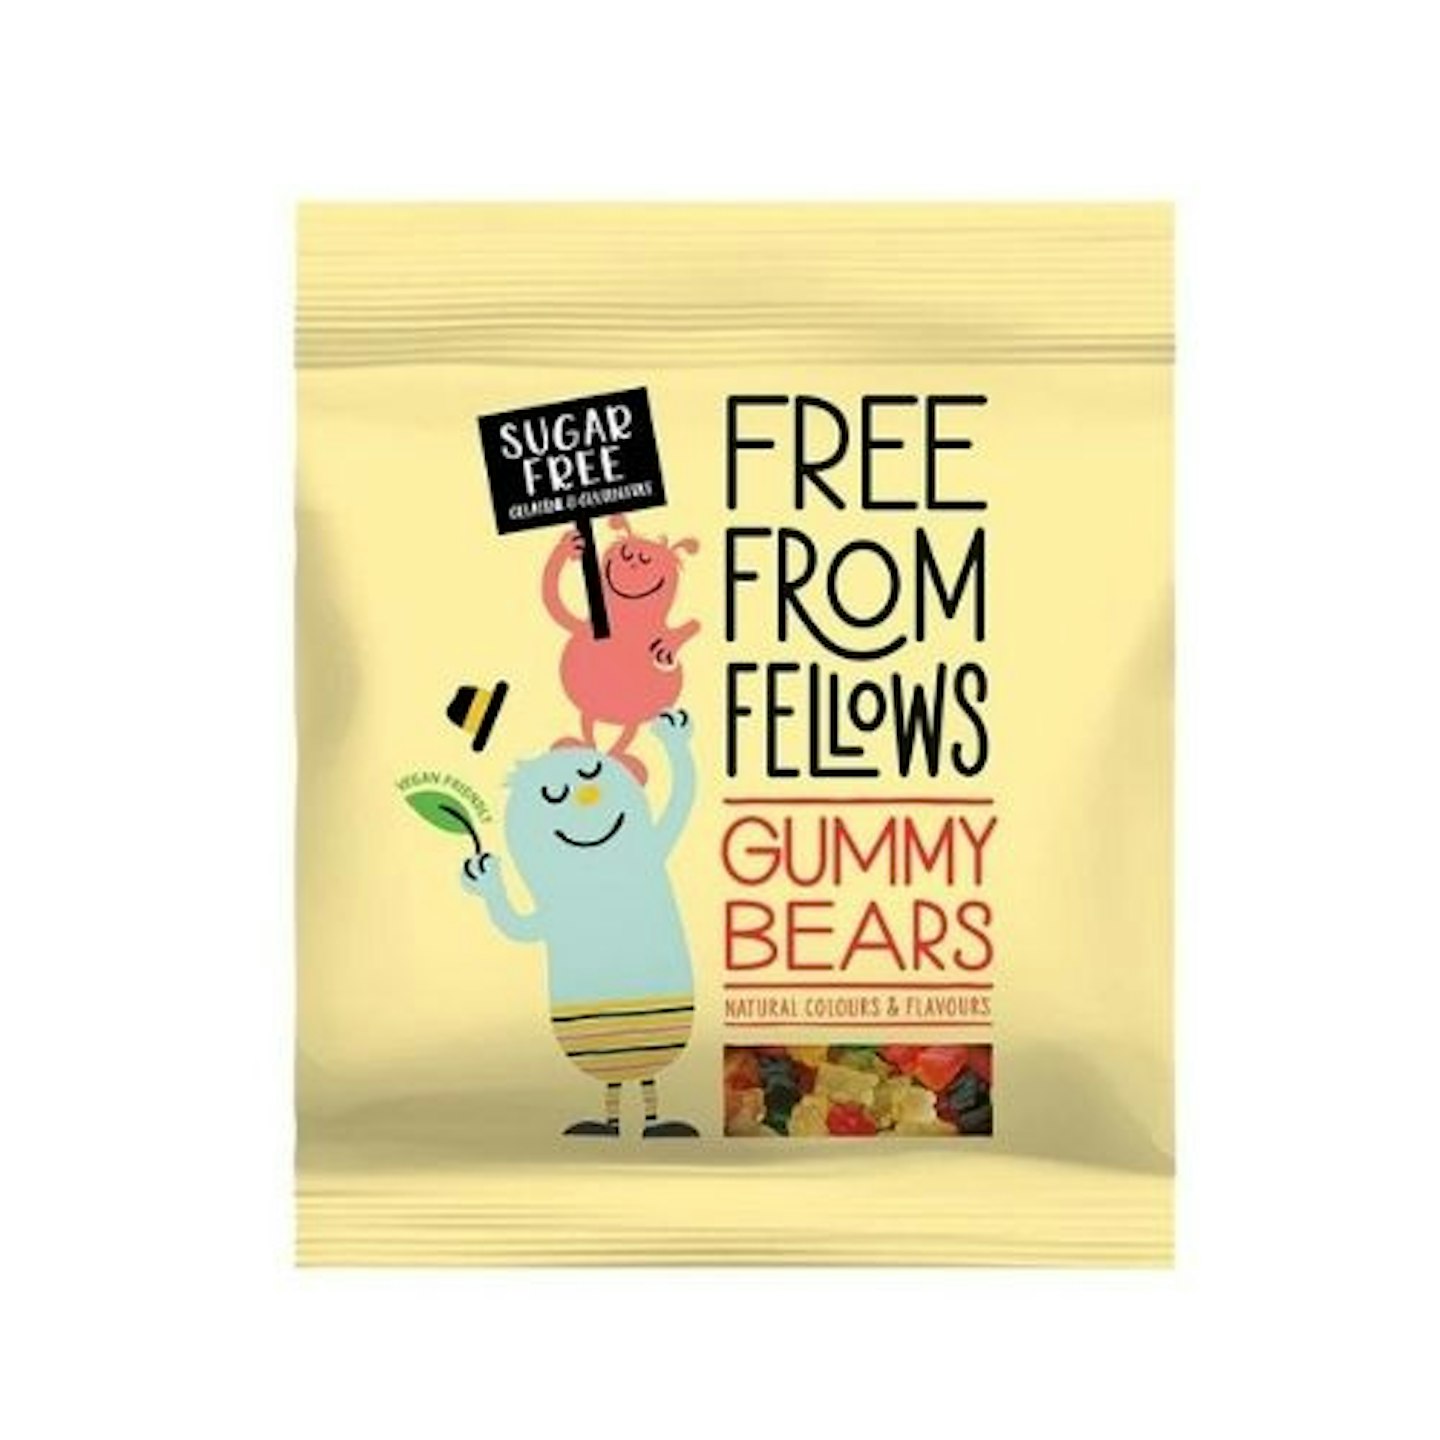 Free From Fellows Gummy Bears